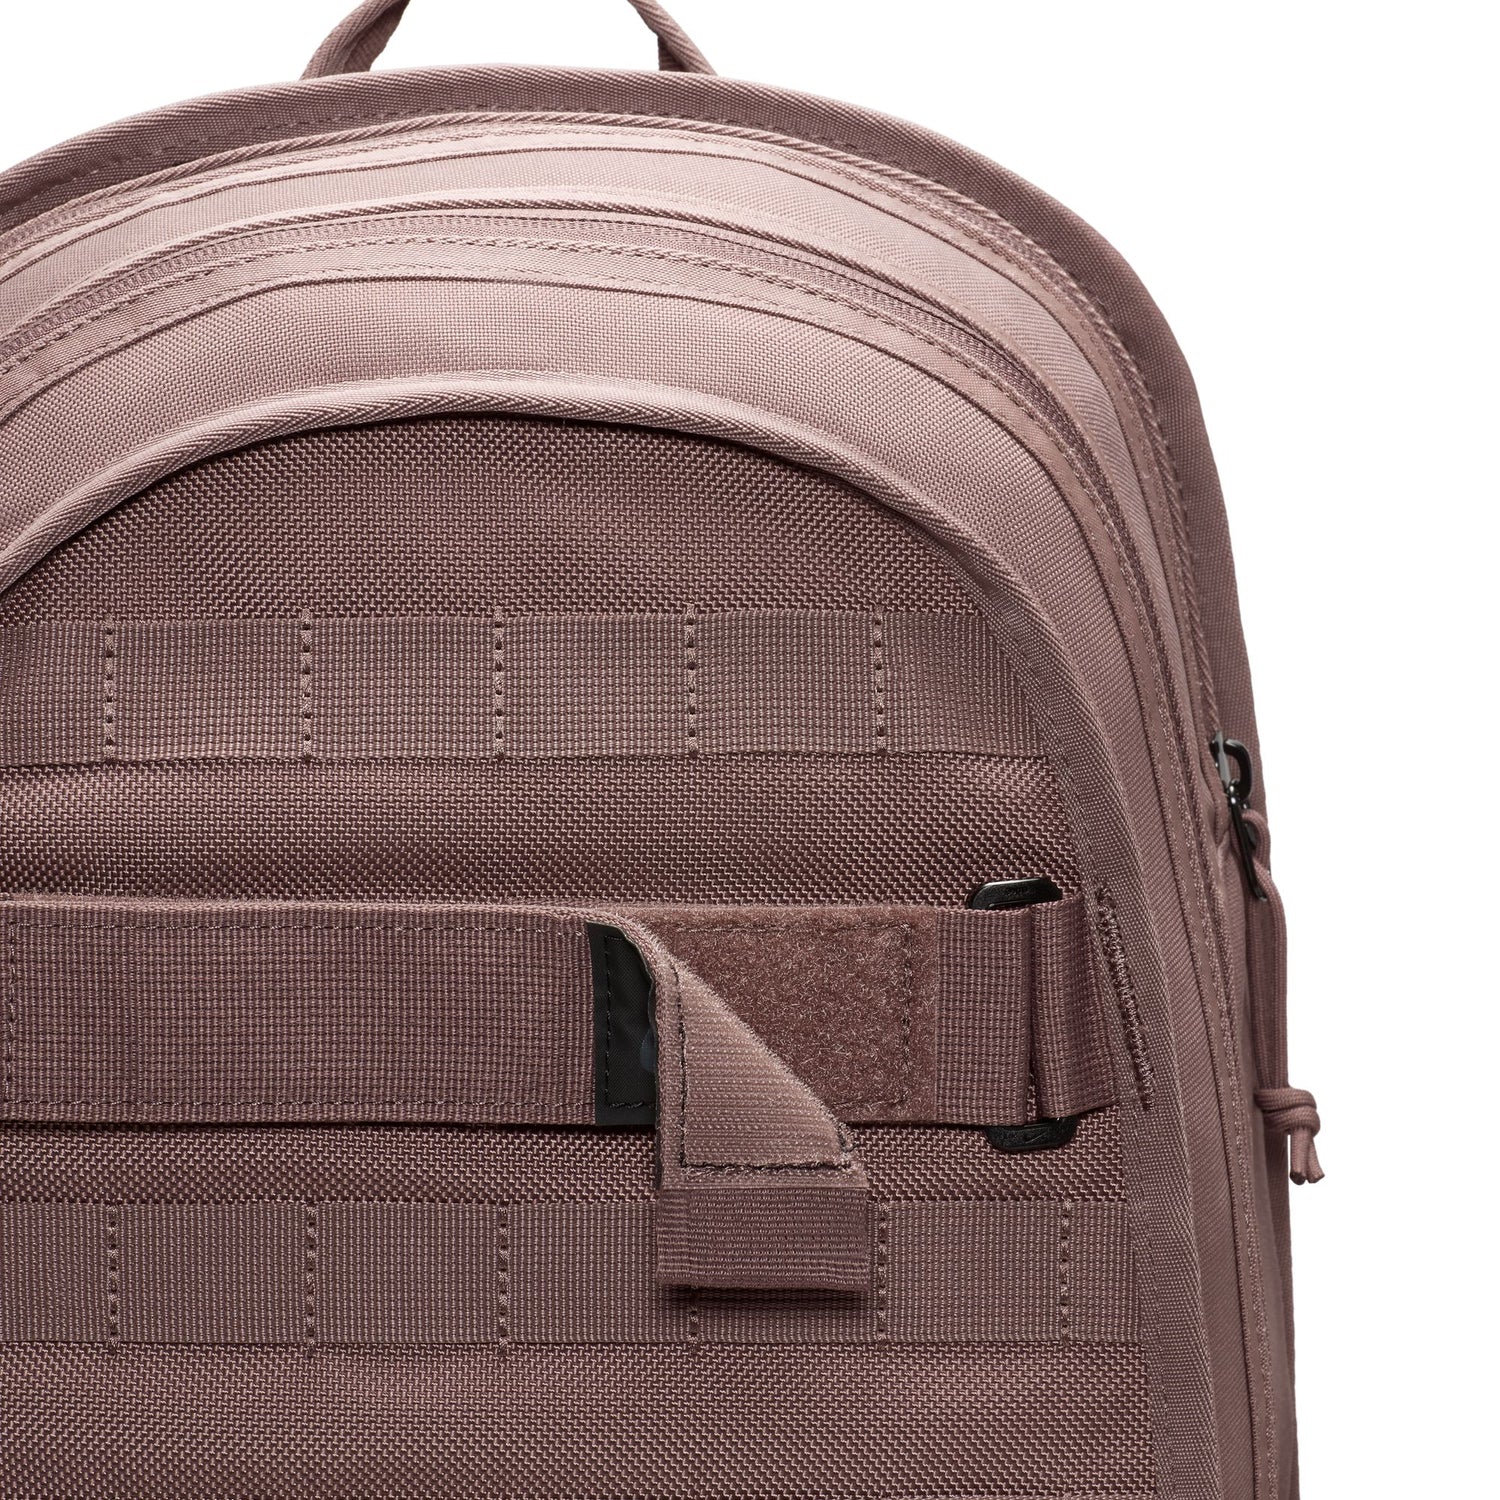 RPM BACKPACK PLUM ECLIPSE / ANTHRACITE